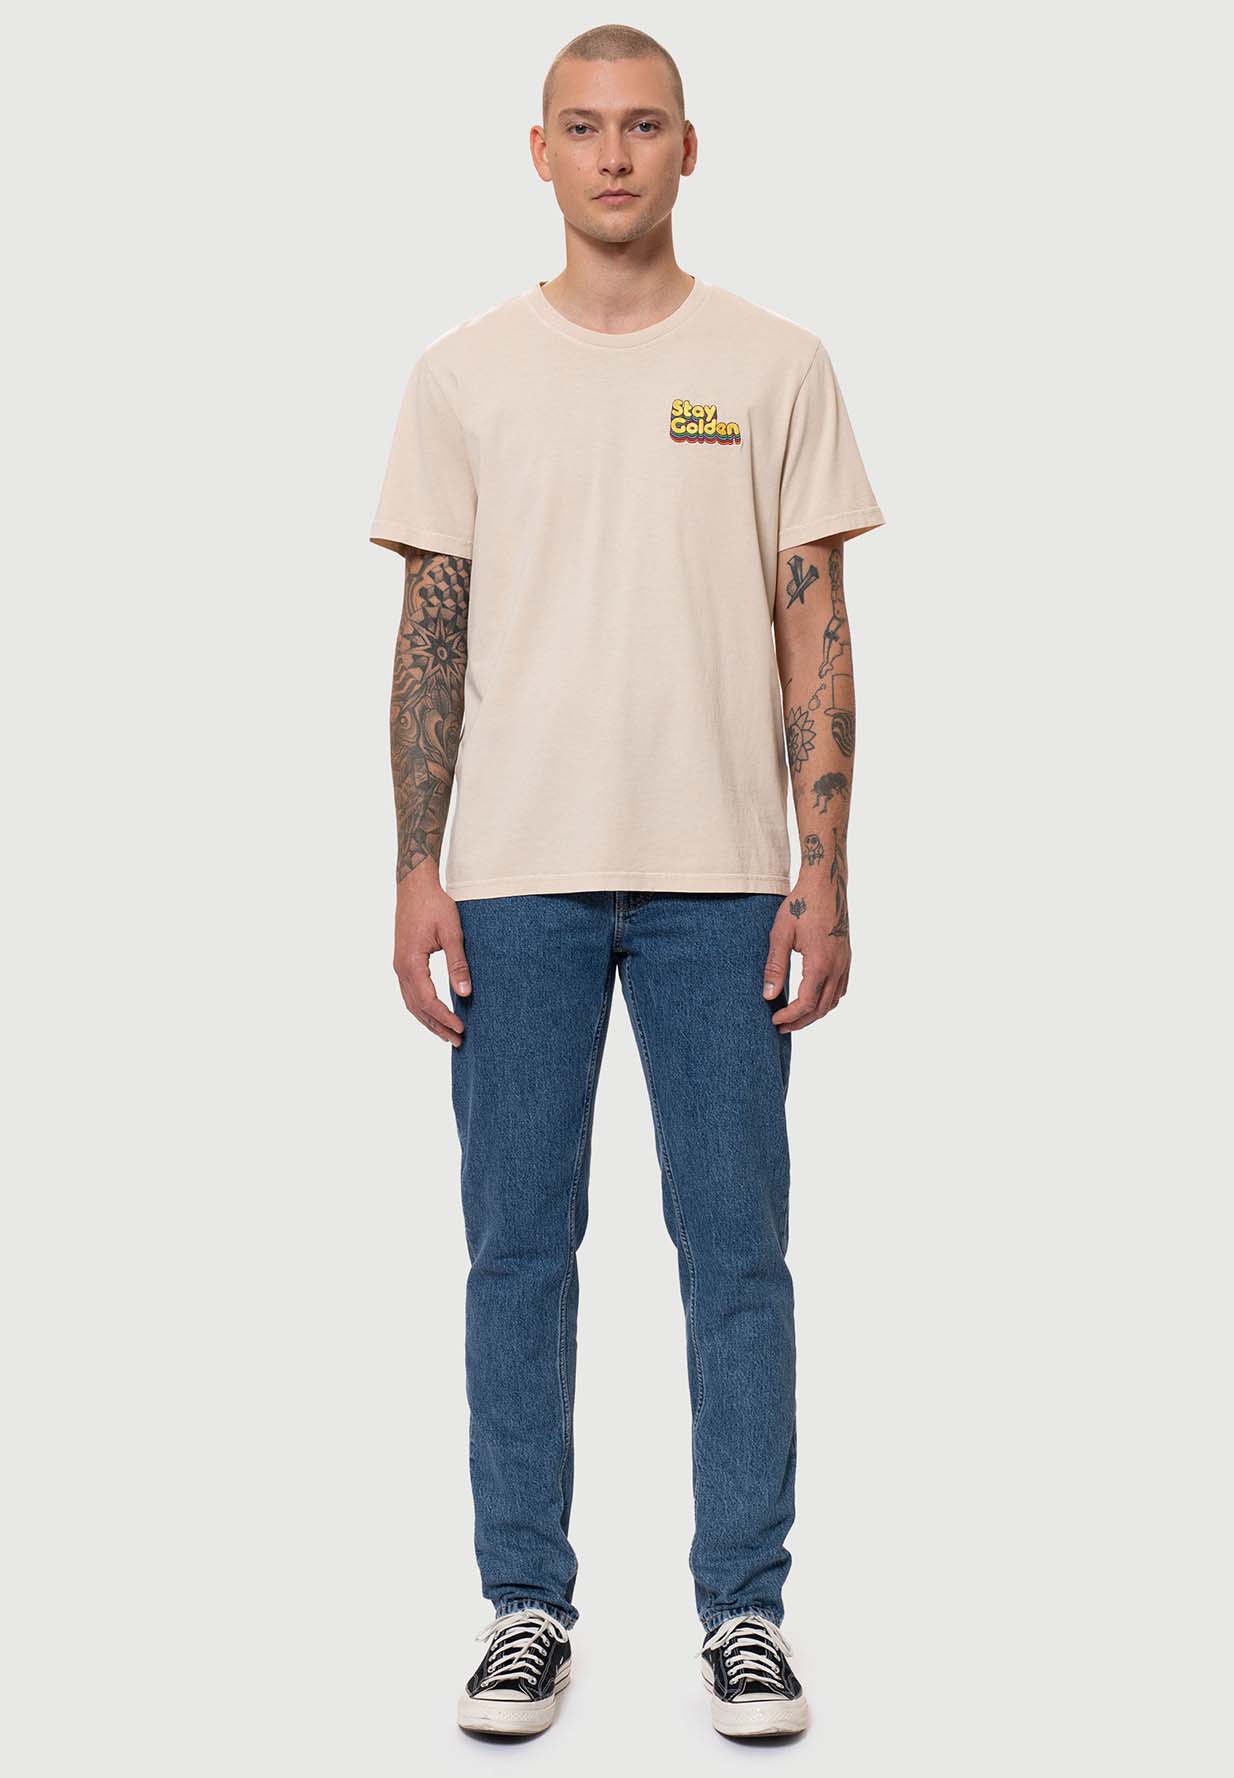 NUDIE JEANS T-Shirt Roy Stay Golden cream S